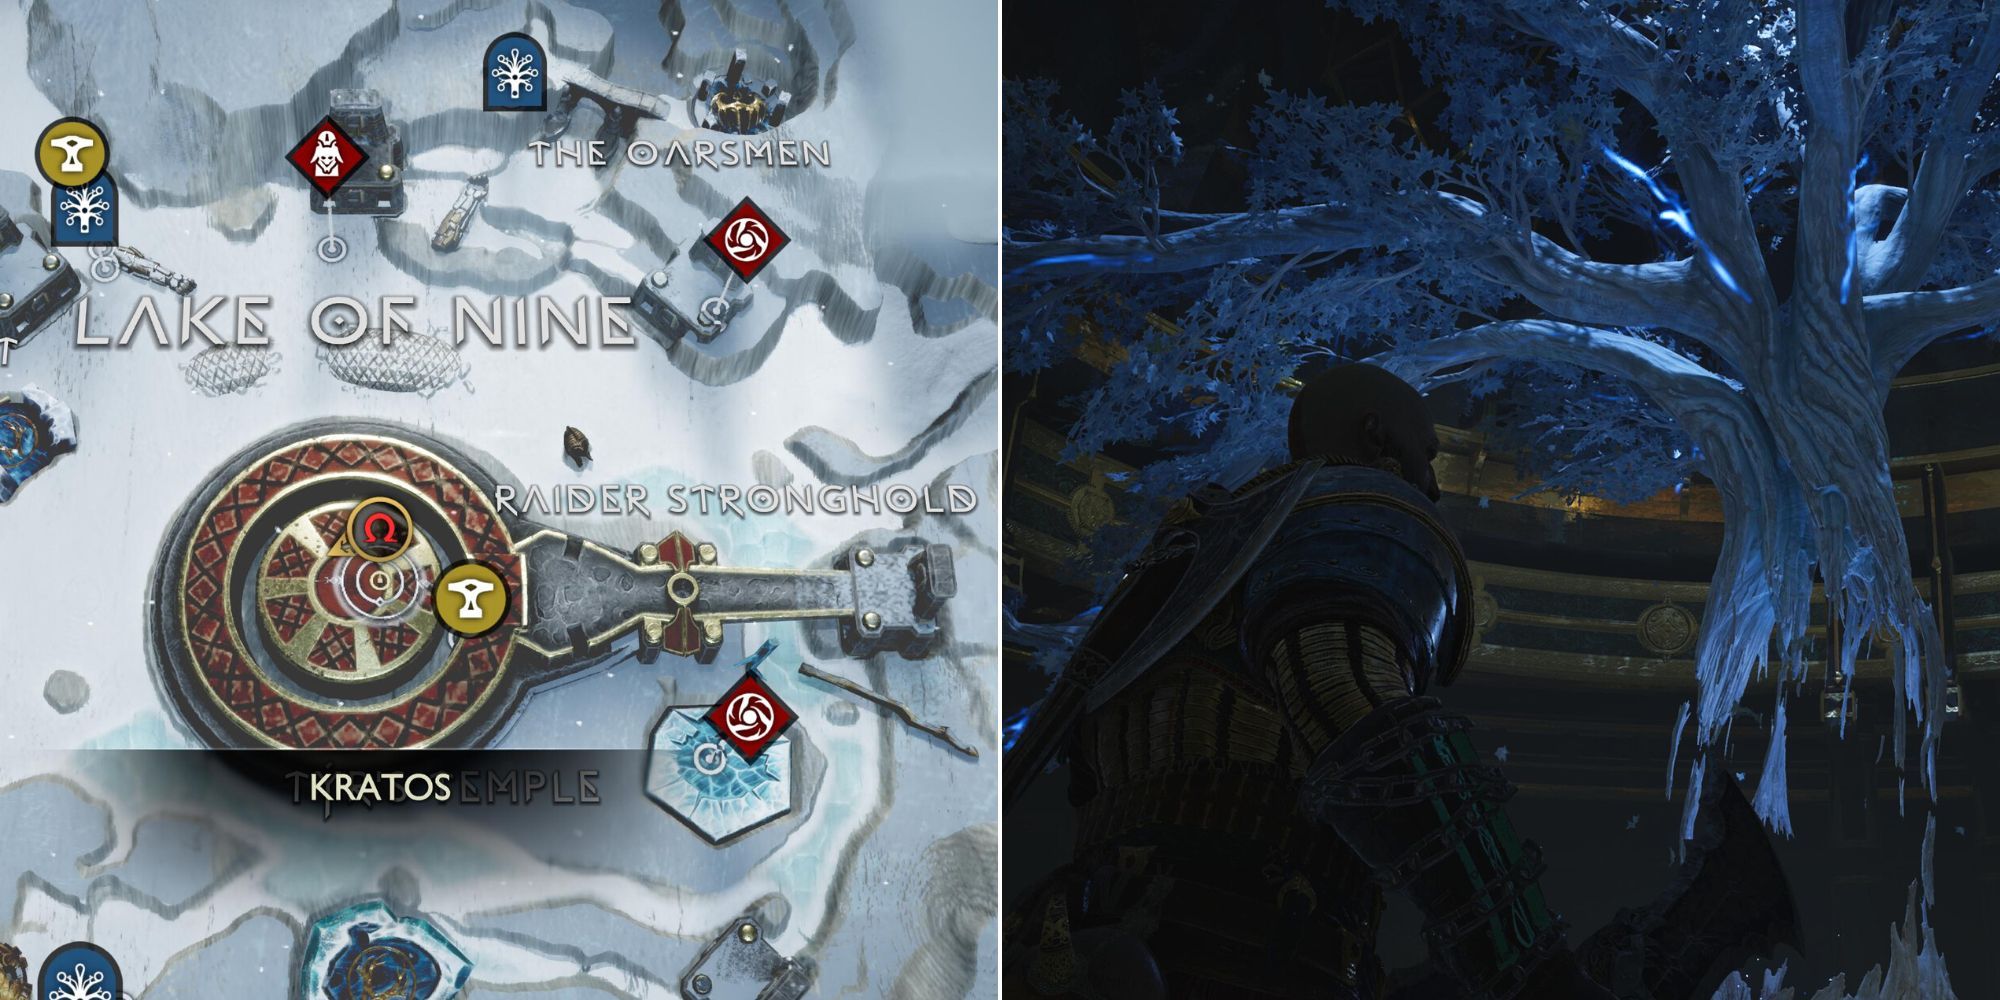 Two photos. Location of the Lake of Nine map on the left, and Kratos standing in the Realm Travel room on the right.